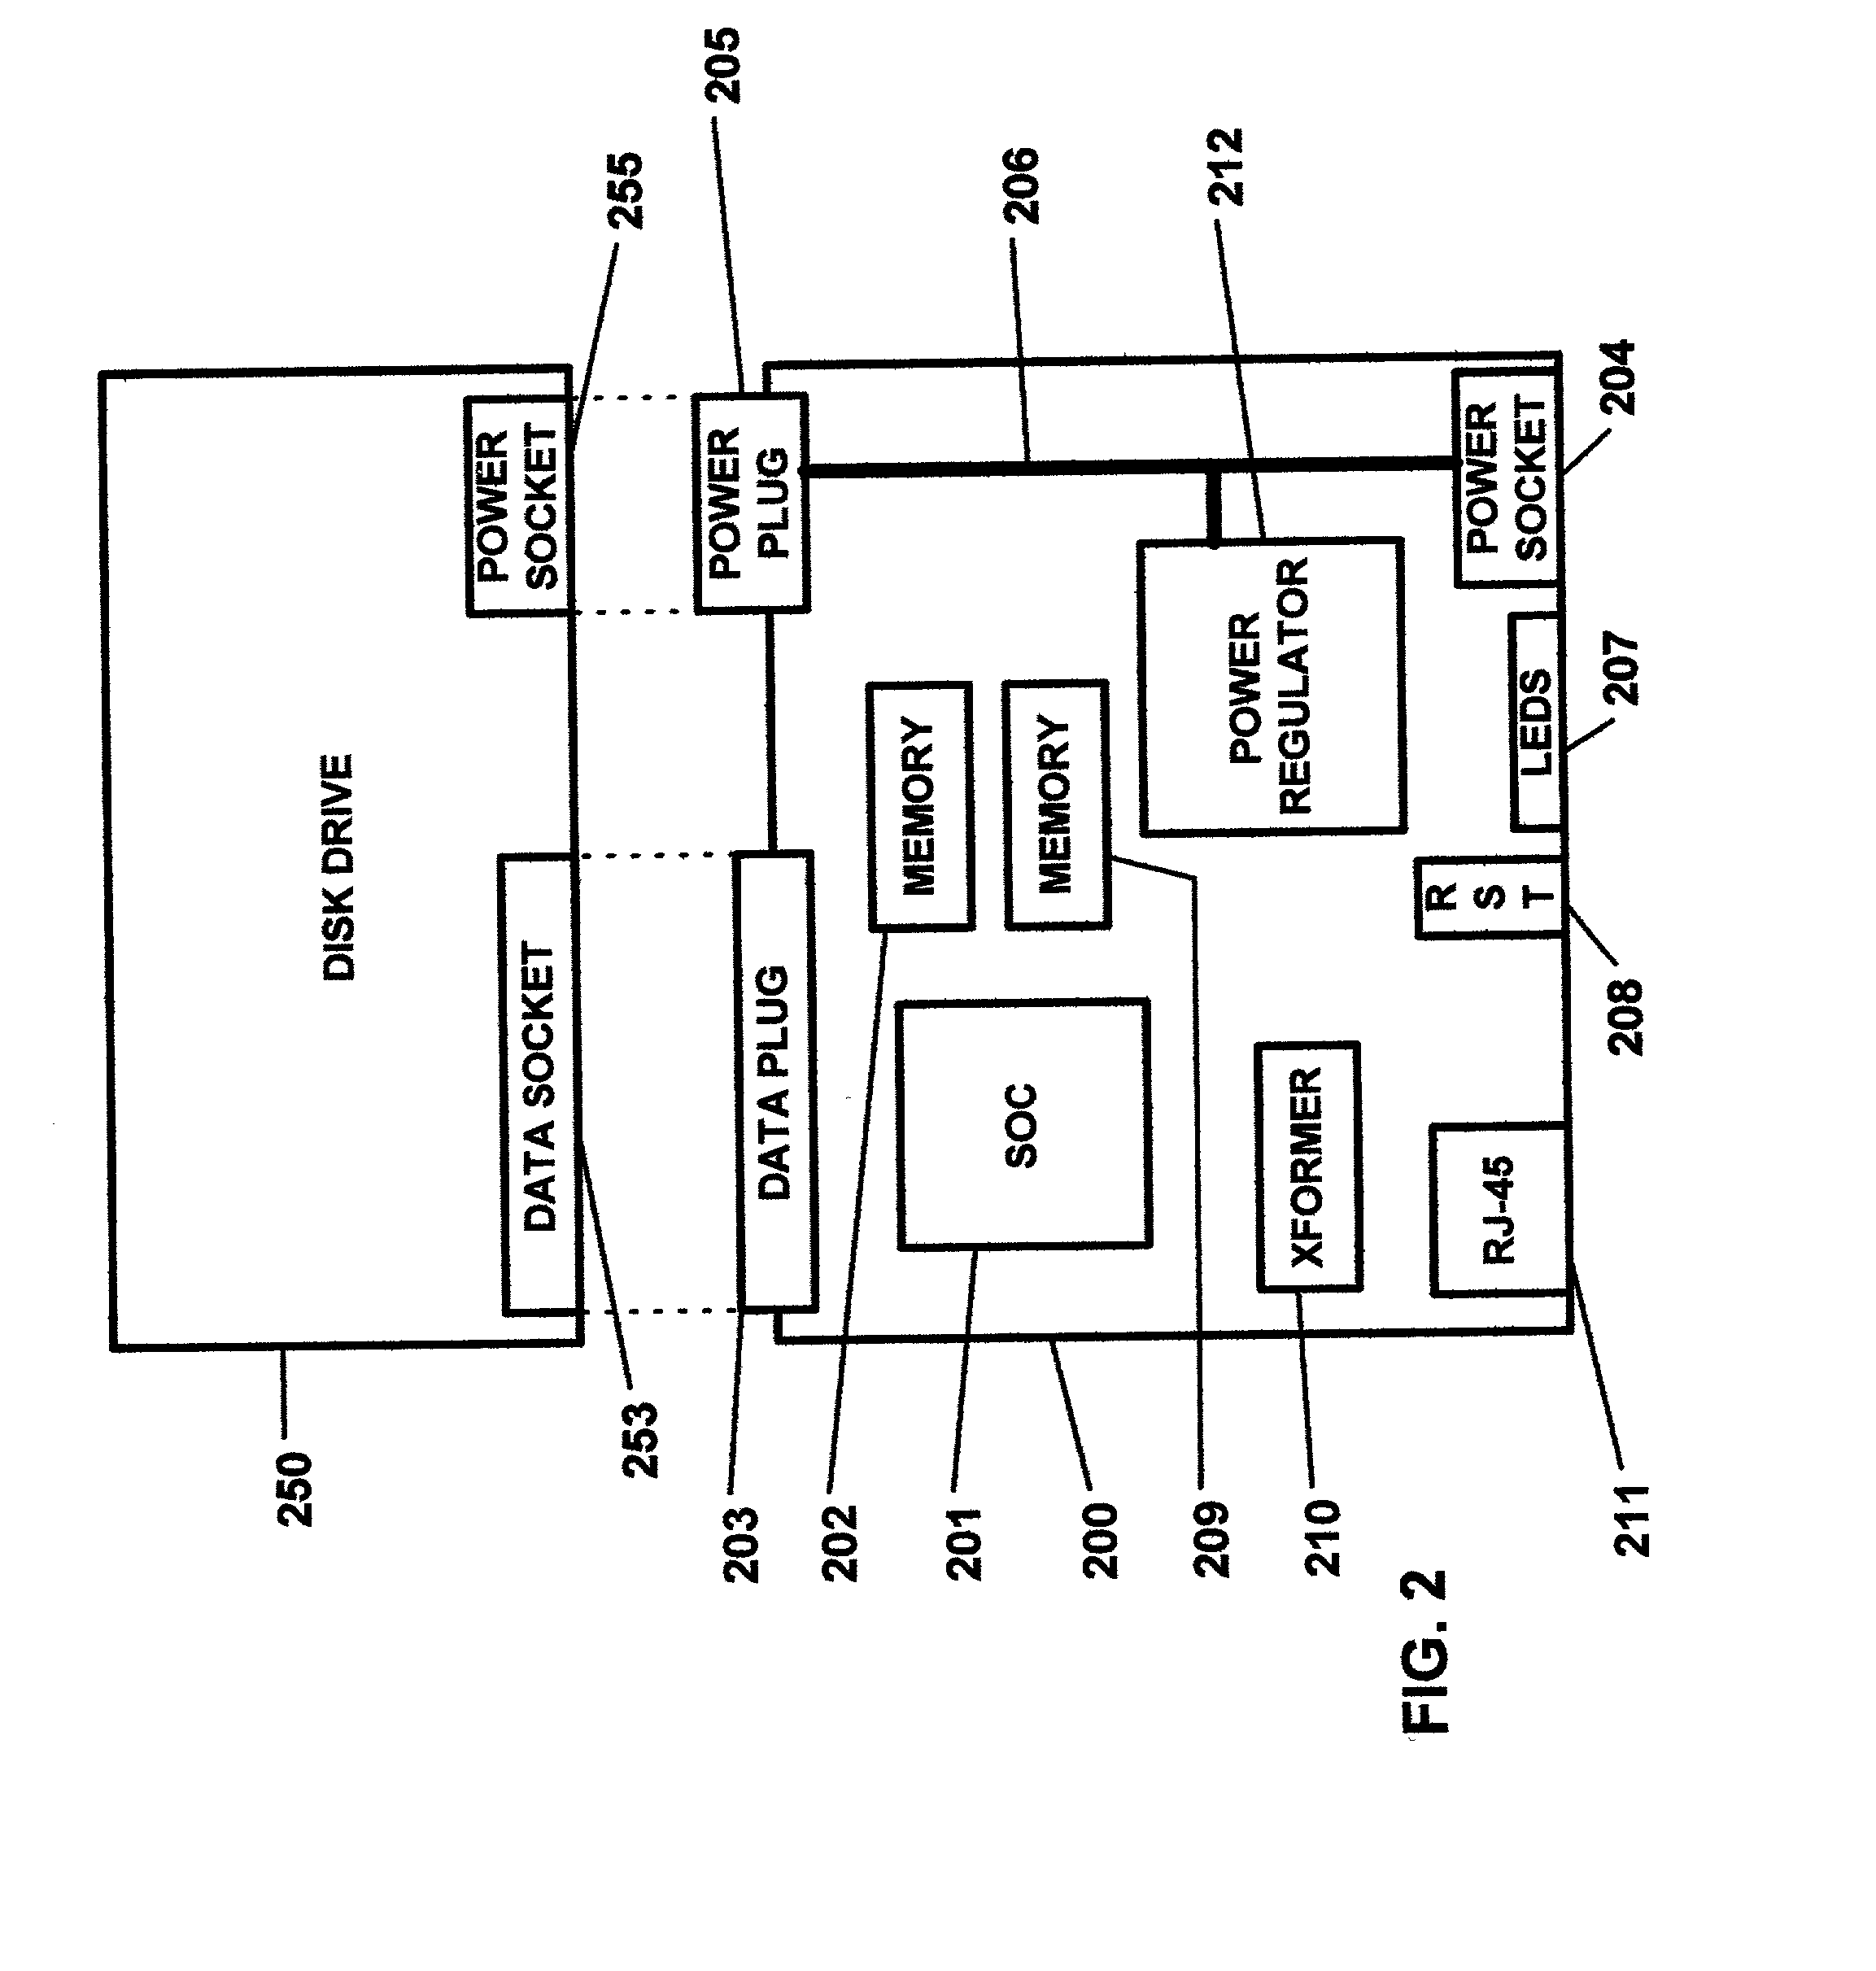 Coupling of CPU and disk drive to form a server and aggregating a plurality of servers into server farms